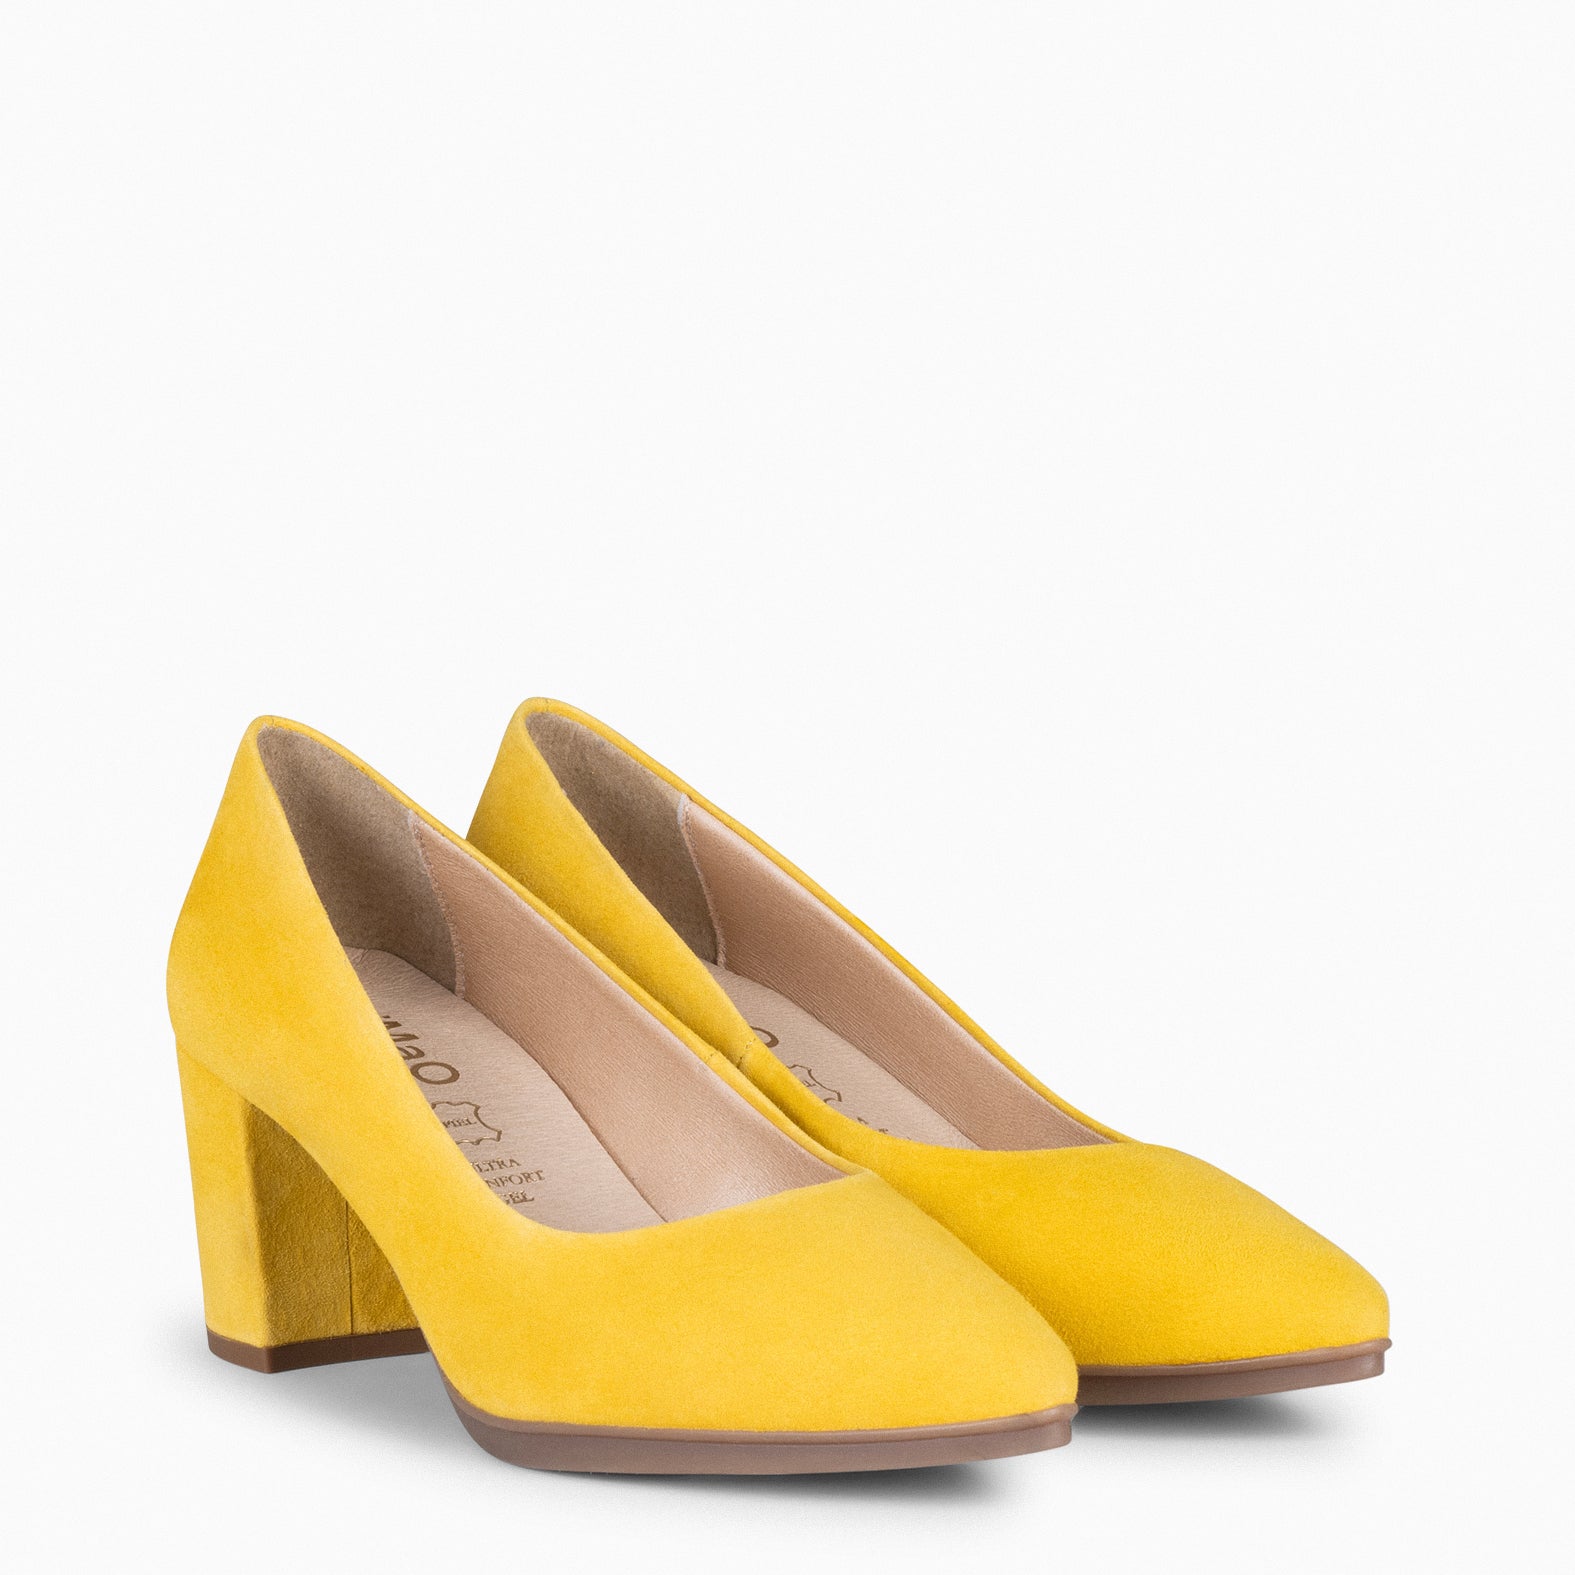 URBAN S – YELLOW Suede Mid-Heeled Shoes 